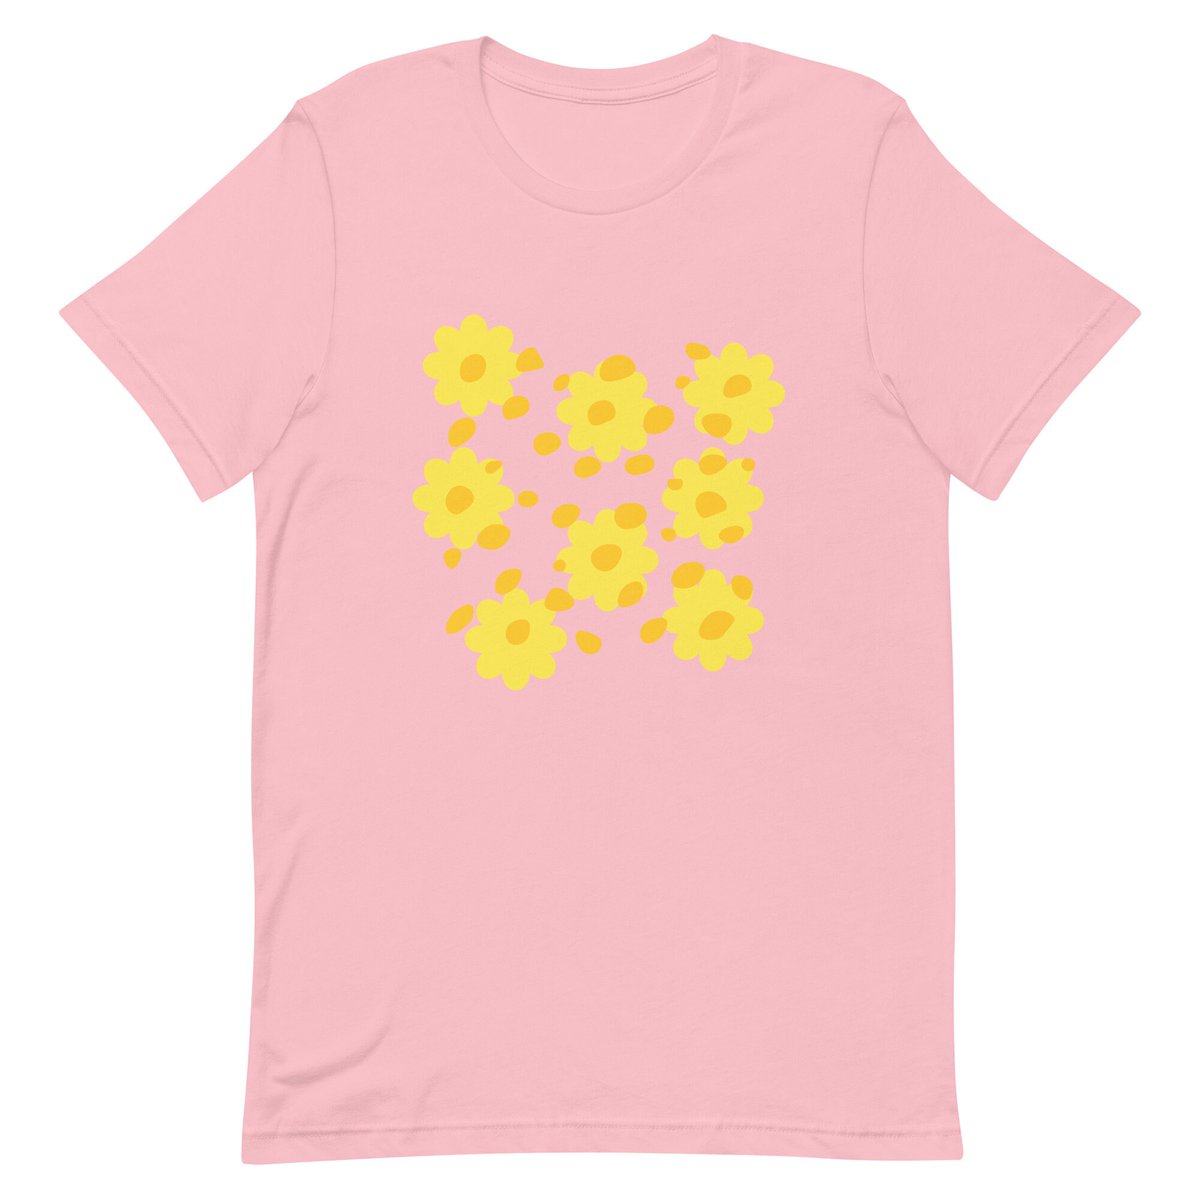 Floral t-shirt, t-shirts for her, gifts for her, Birthday gift, Mothers Day, Valentine's Day tuppu.net/7a4e654d #EtsyShop #Etsy #HandmadeGifts #FathersDay #MothersDay #GiftsforMom #MemorialDay #FourthofJuly #WomensThirts